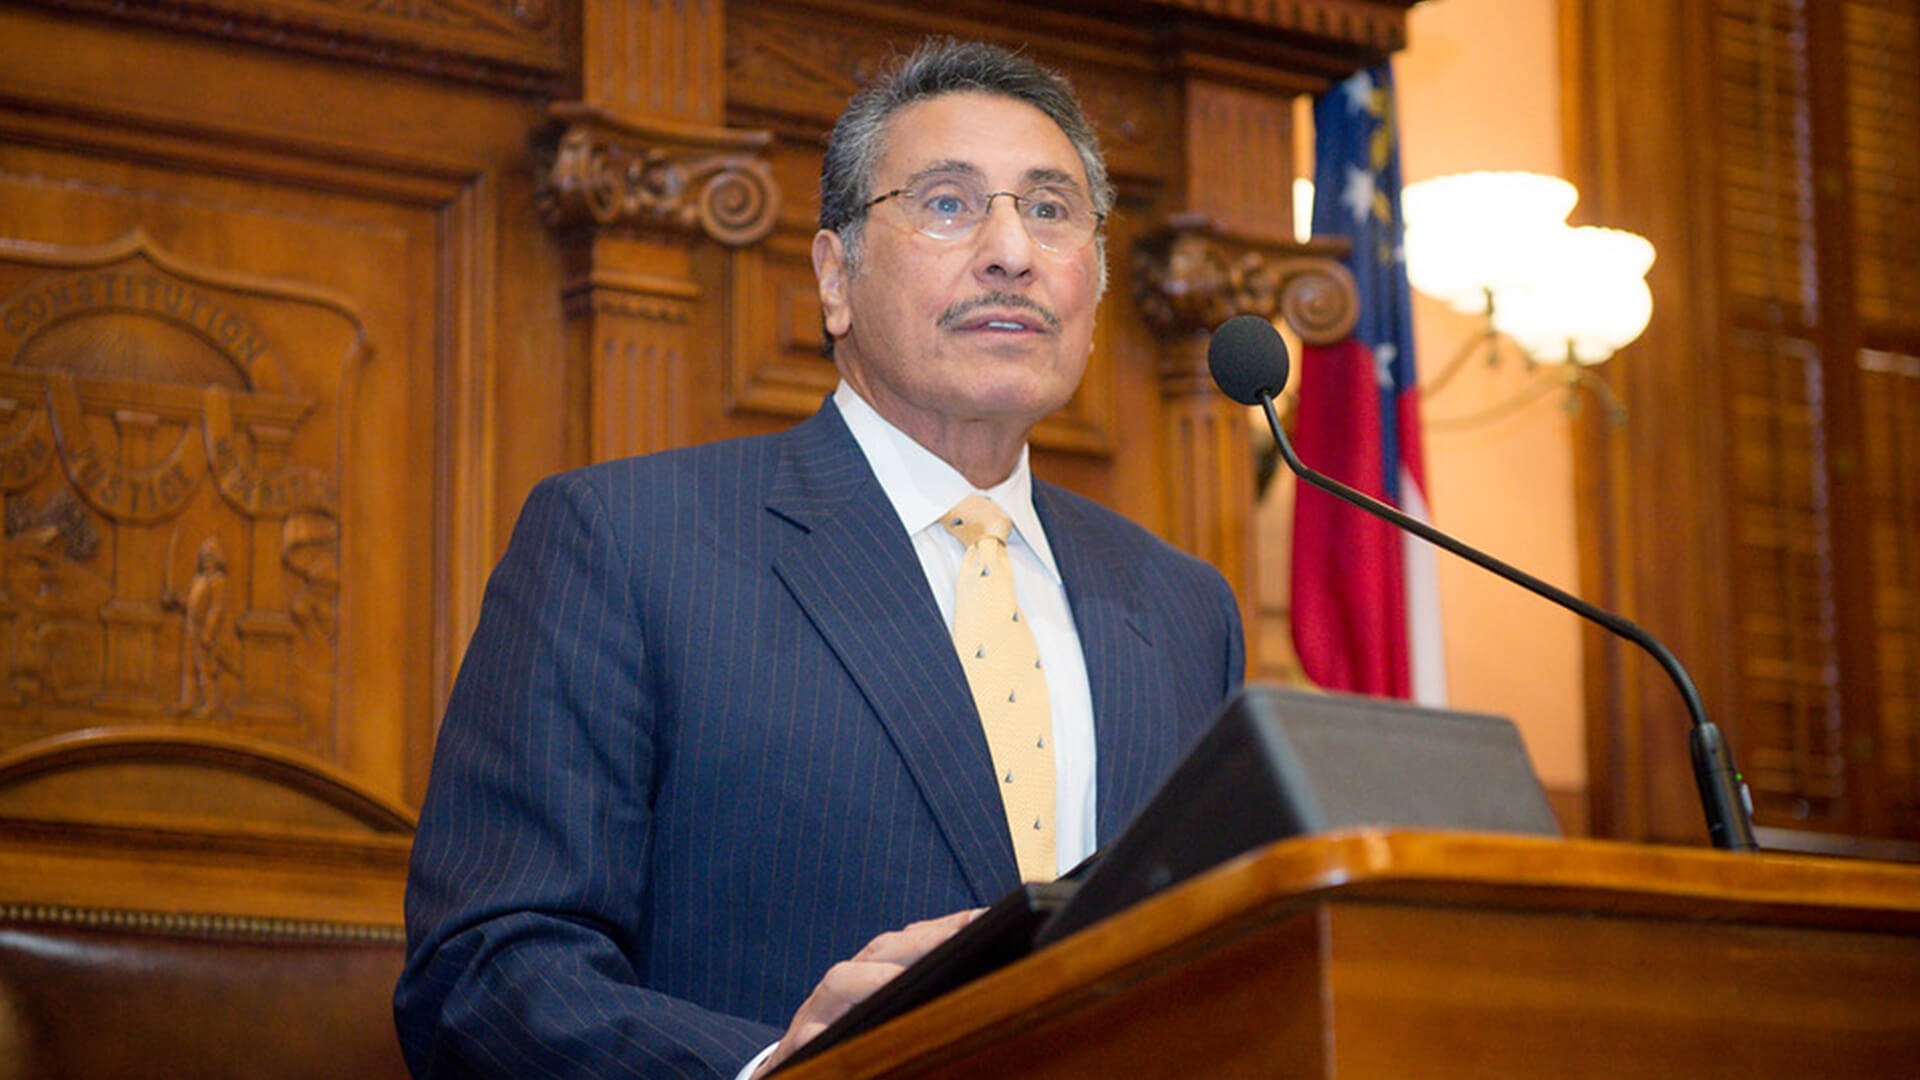 Dr. Michael Youssef at the Georgia House of Representatives